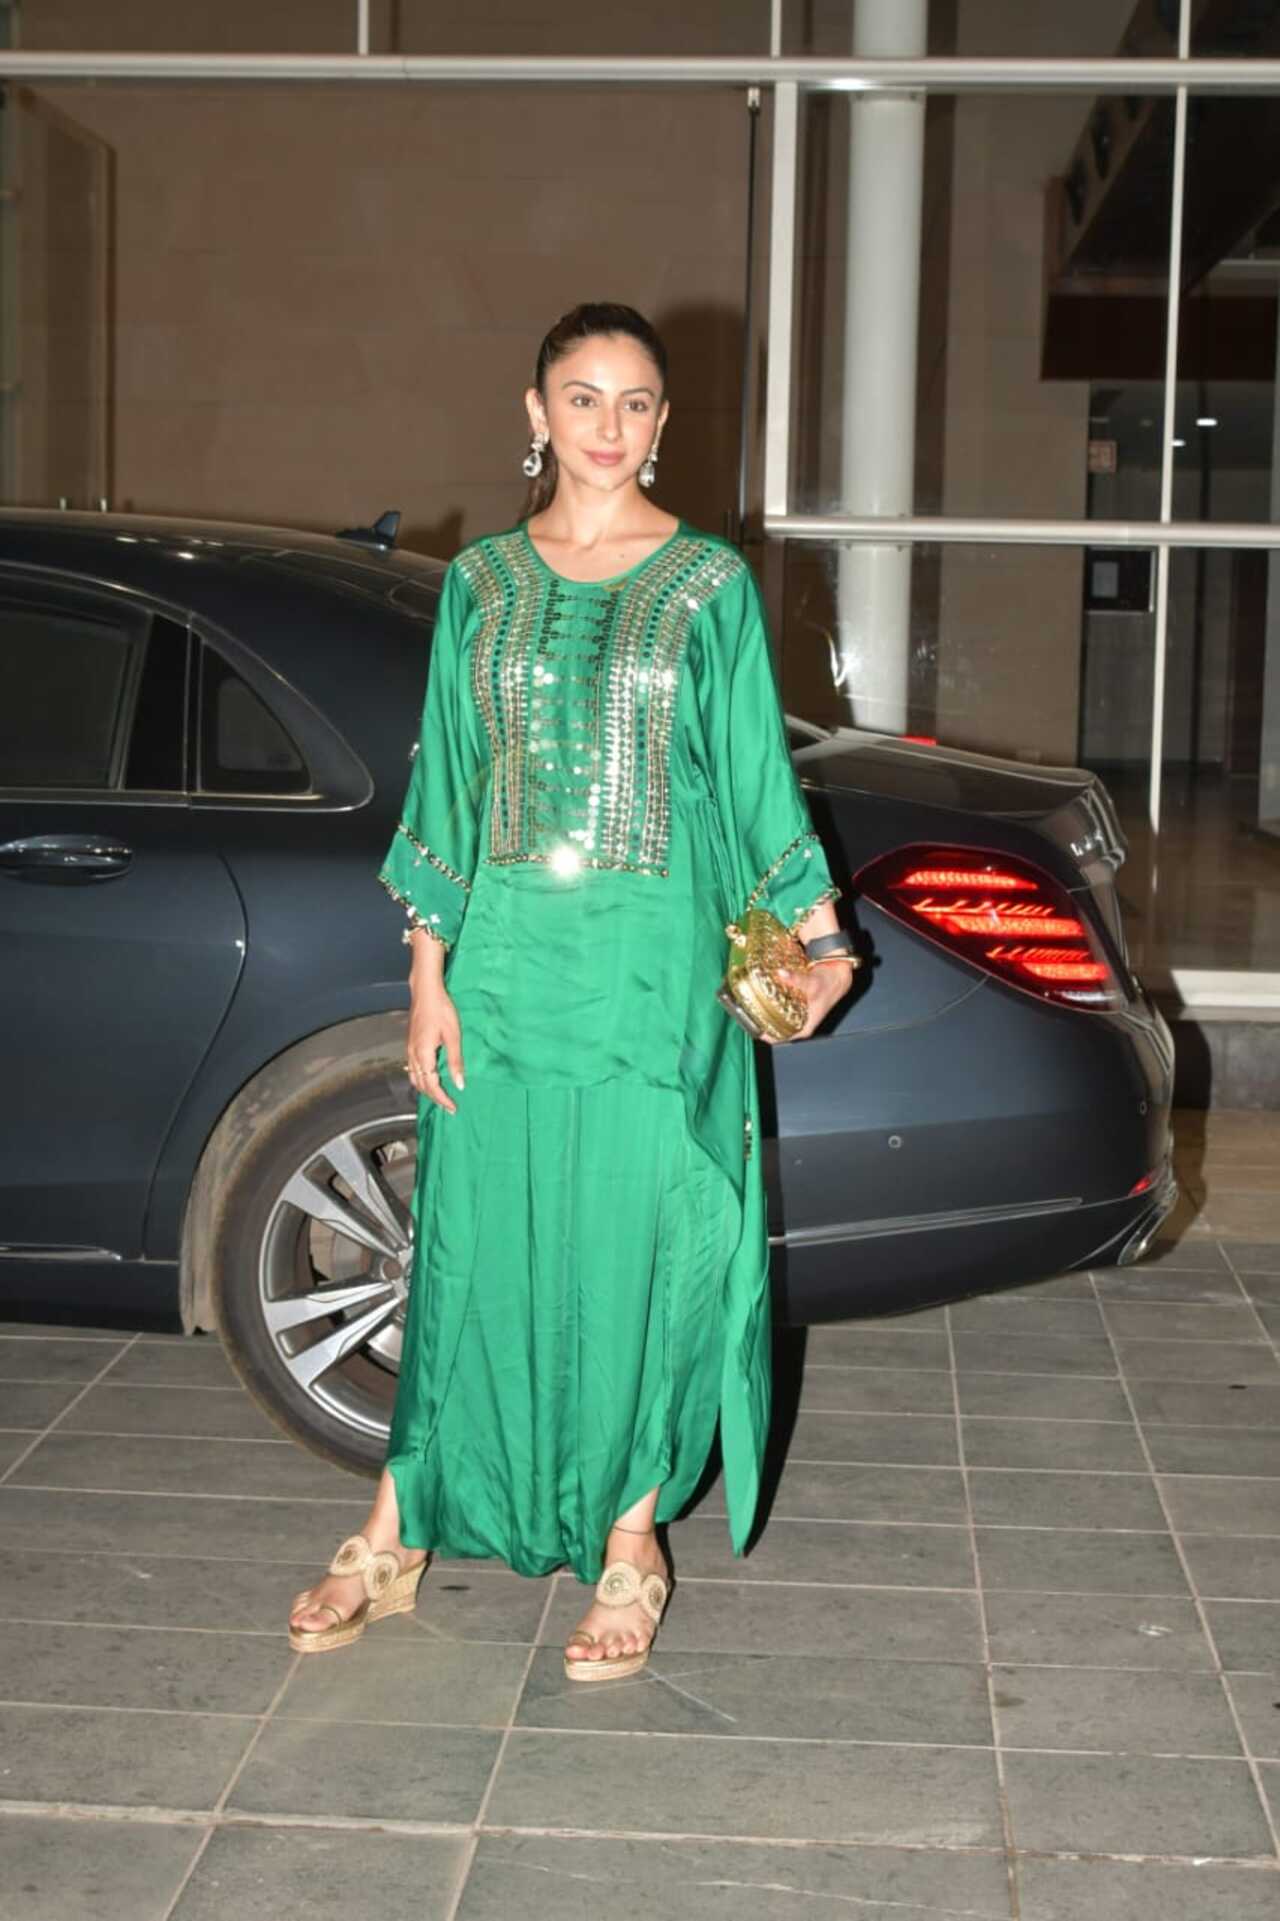 Also present was the newly married actress Rakul Preet Singh who wore an emerald green ethnic ensemble. 